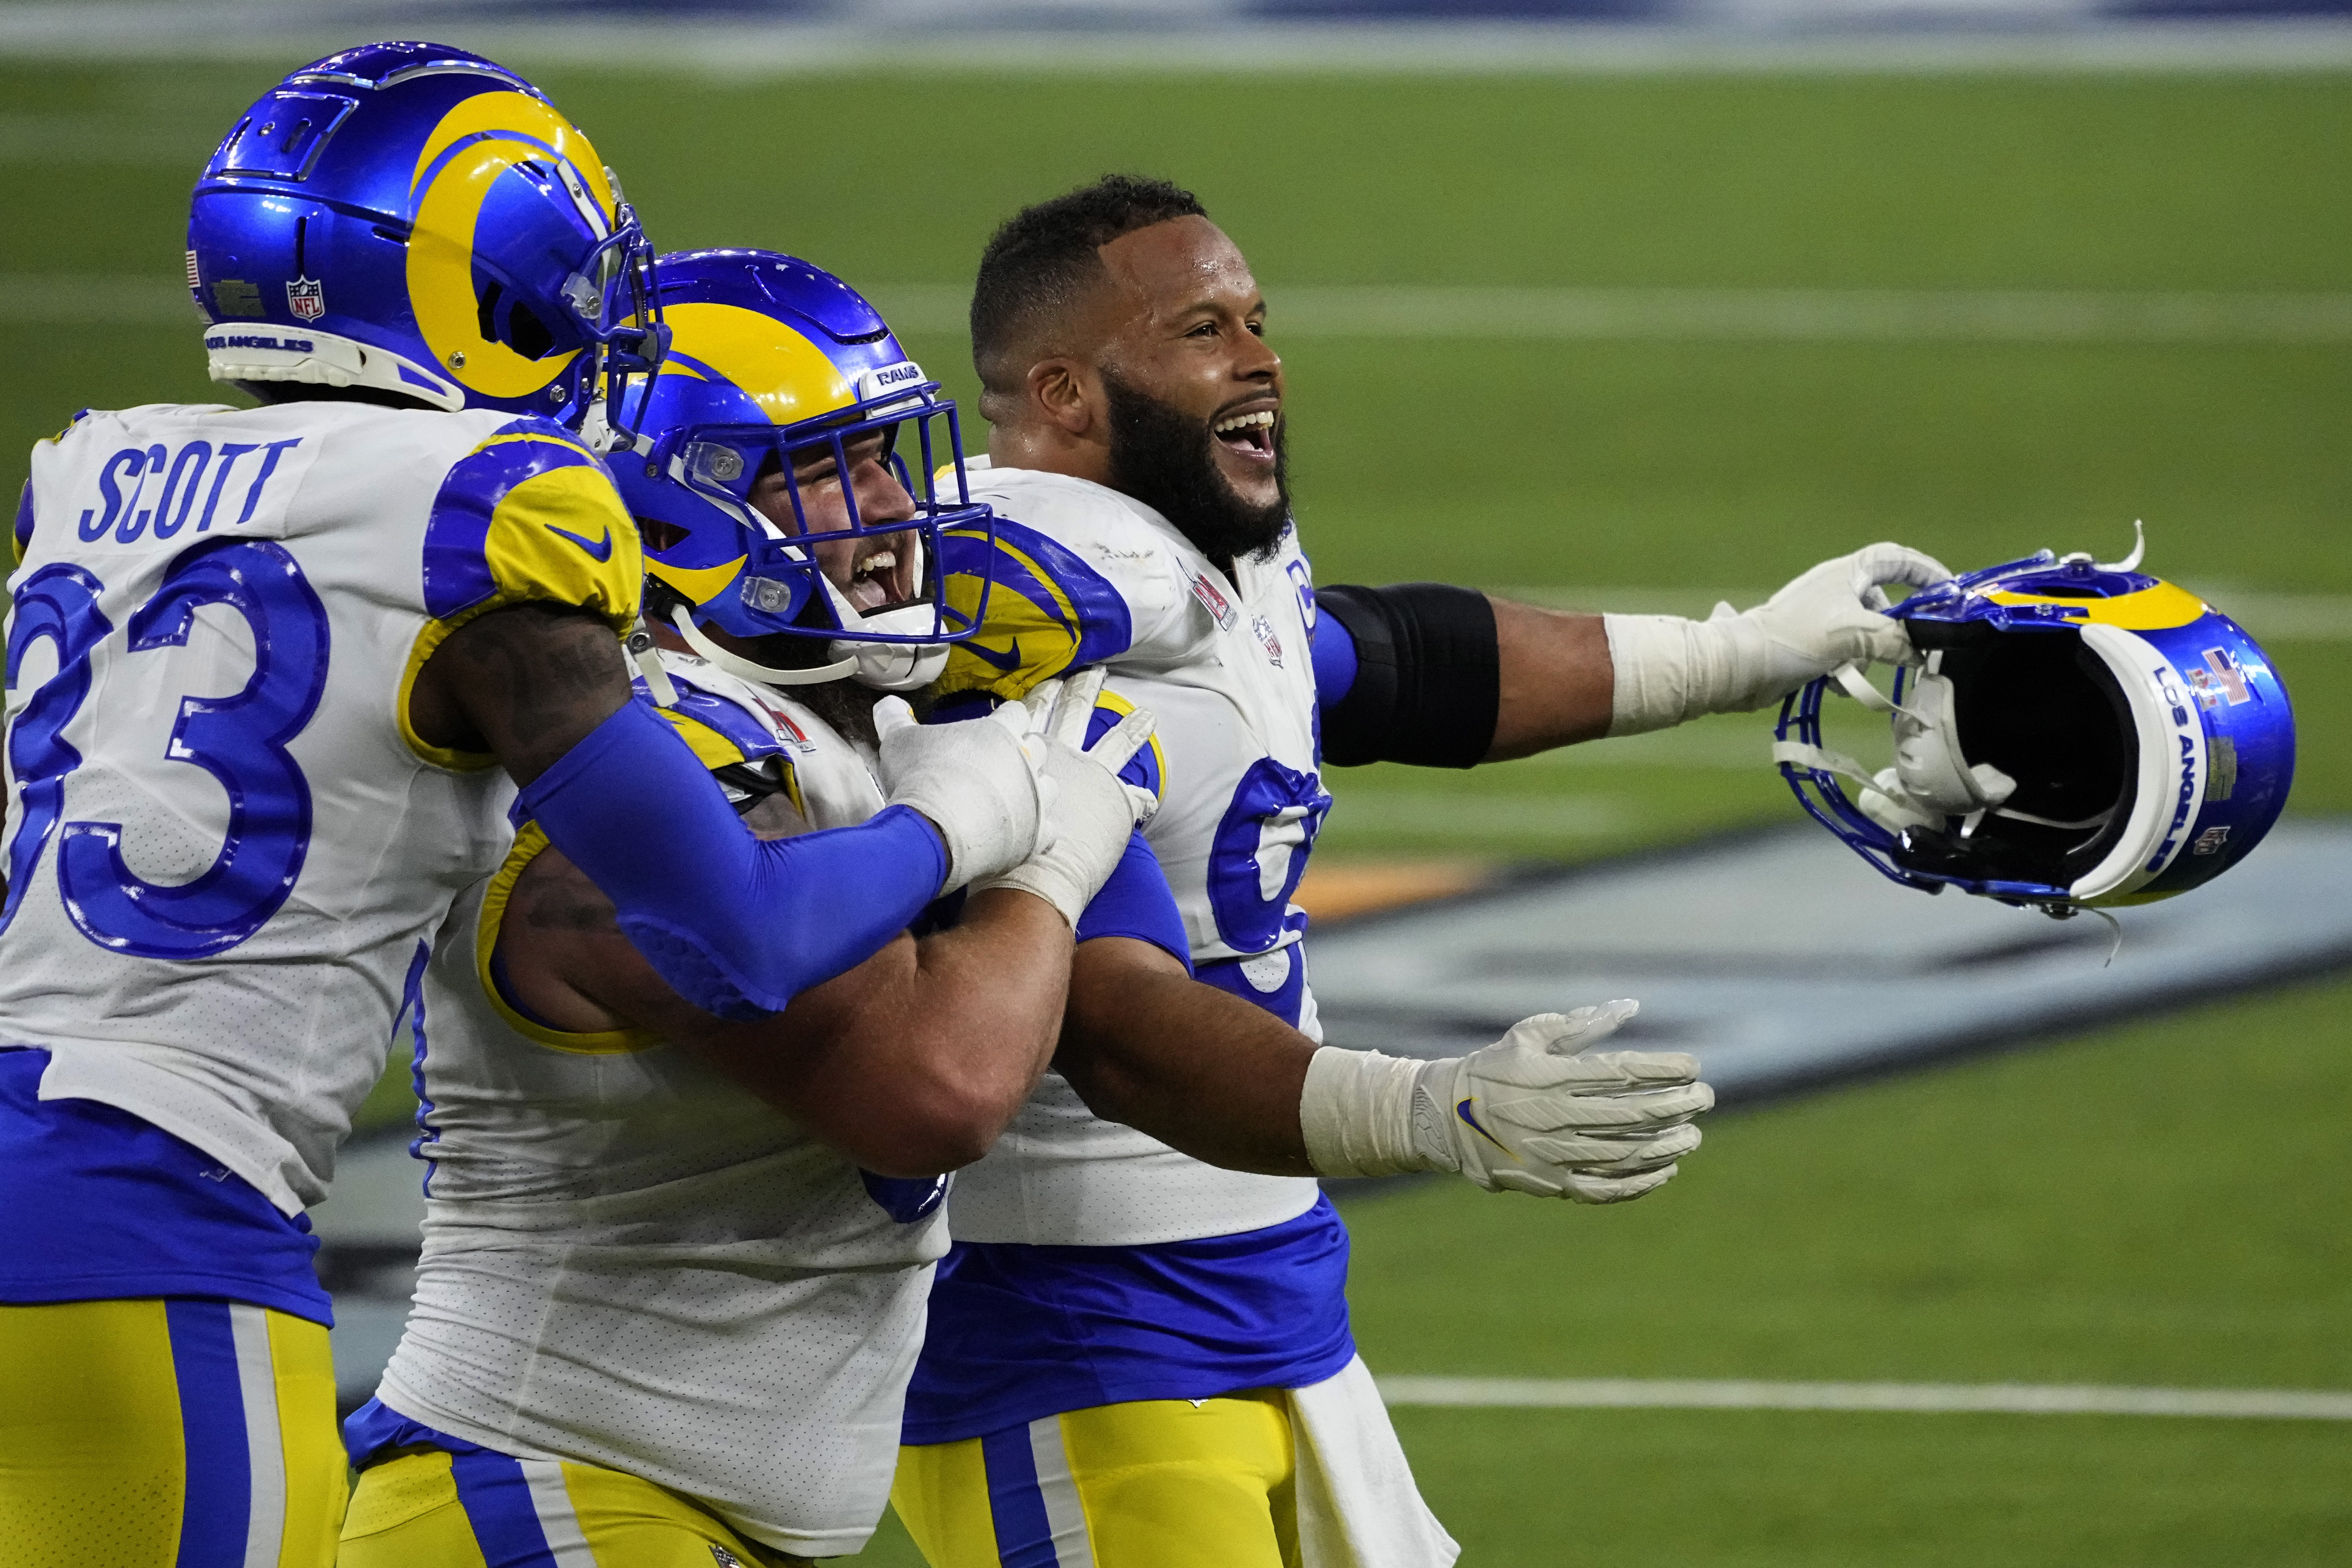 Kupp's late TD lifts Rams over Bengals 23-20 in Super Bowl